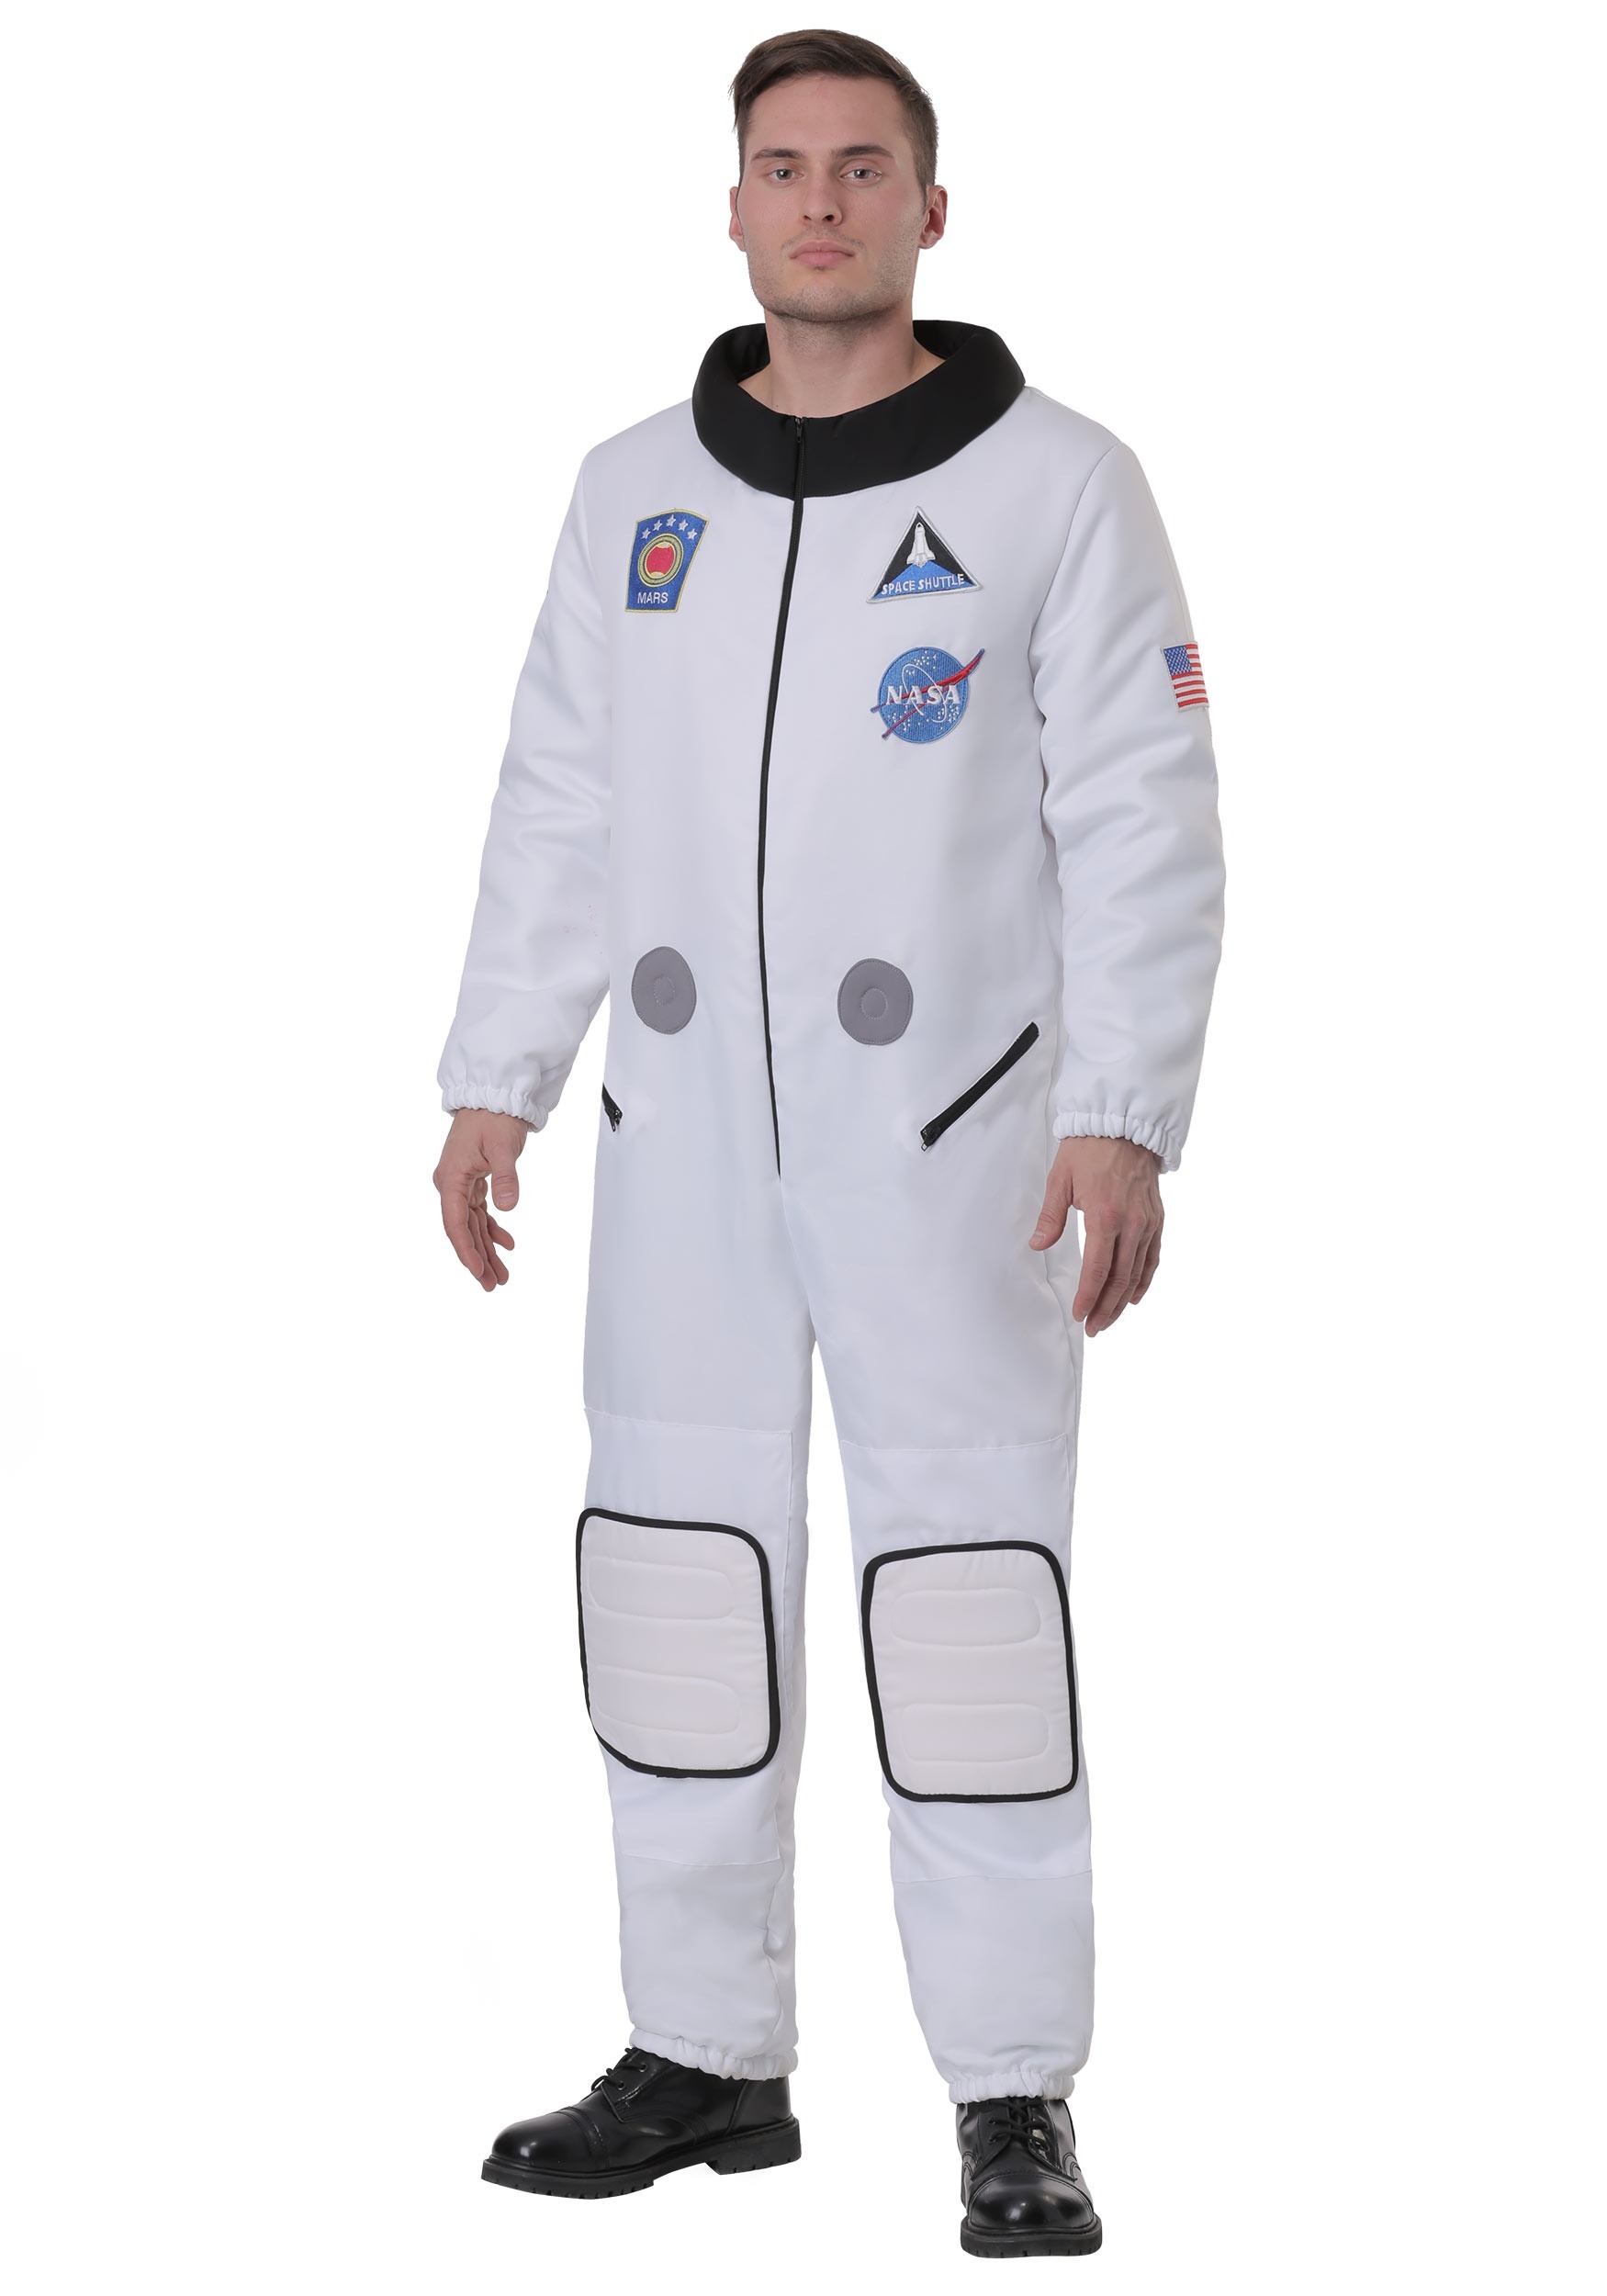 Image of Deluxe Astronaut Costume for Plus Size Men | Astronaut Costumes ID FUN6149PL-2X